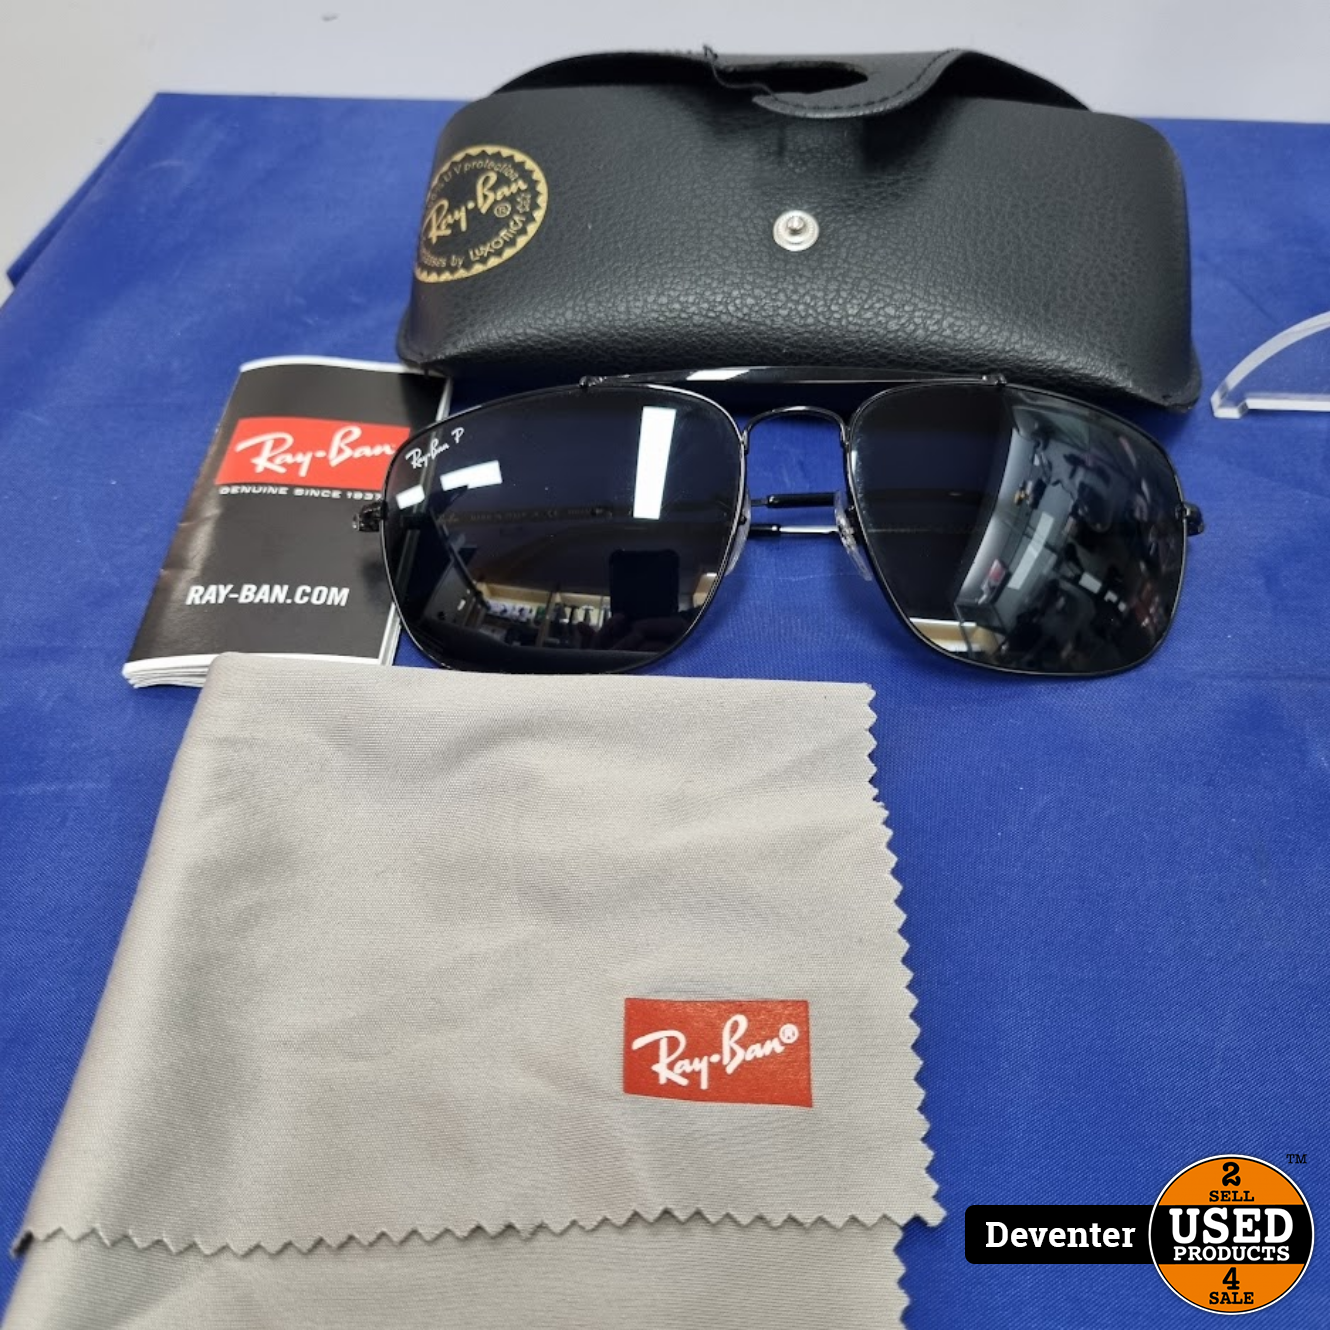 ondergeschikt Aanvulling aanklager RayBan Ray-Ban RB3560 'The Colonel' Polarized Zonnebril zwart - Used  Products Deventer